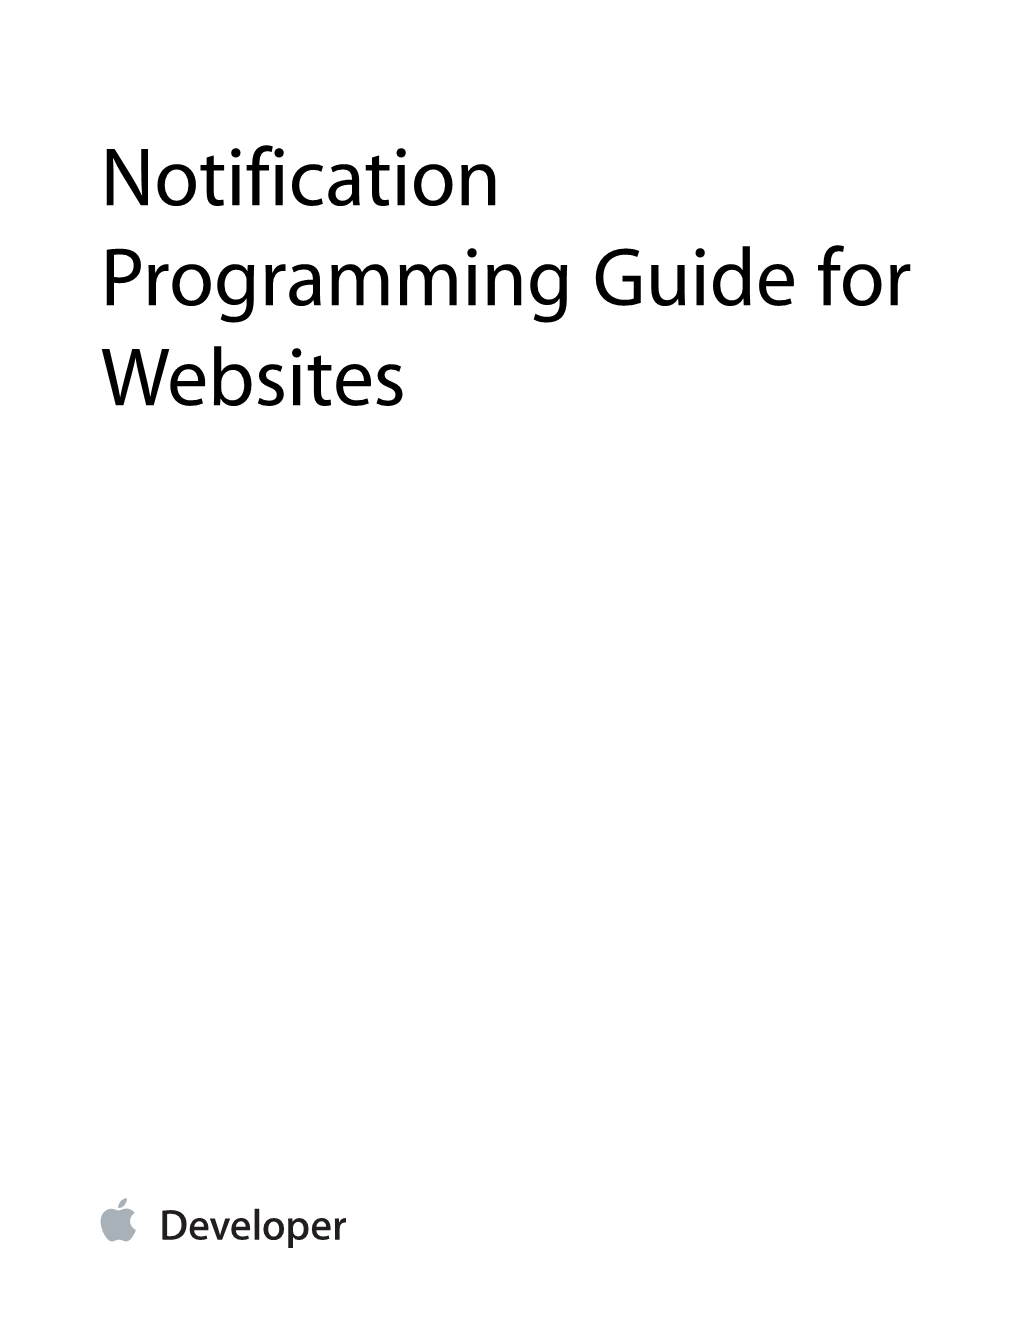 Notification Programming Guide for Websites Contents